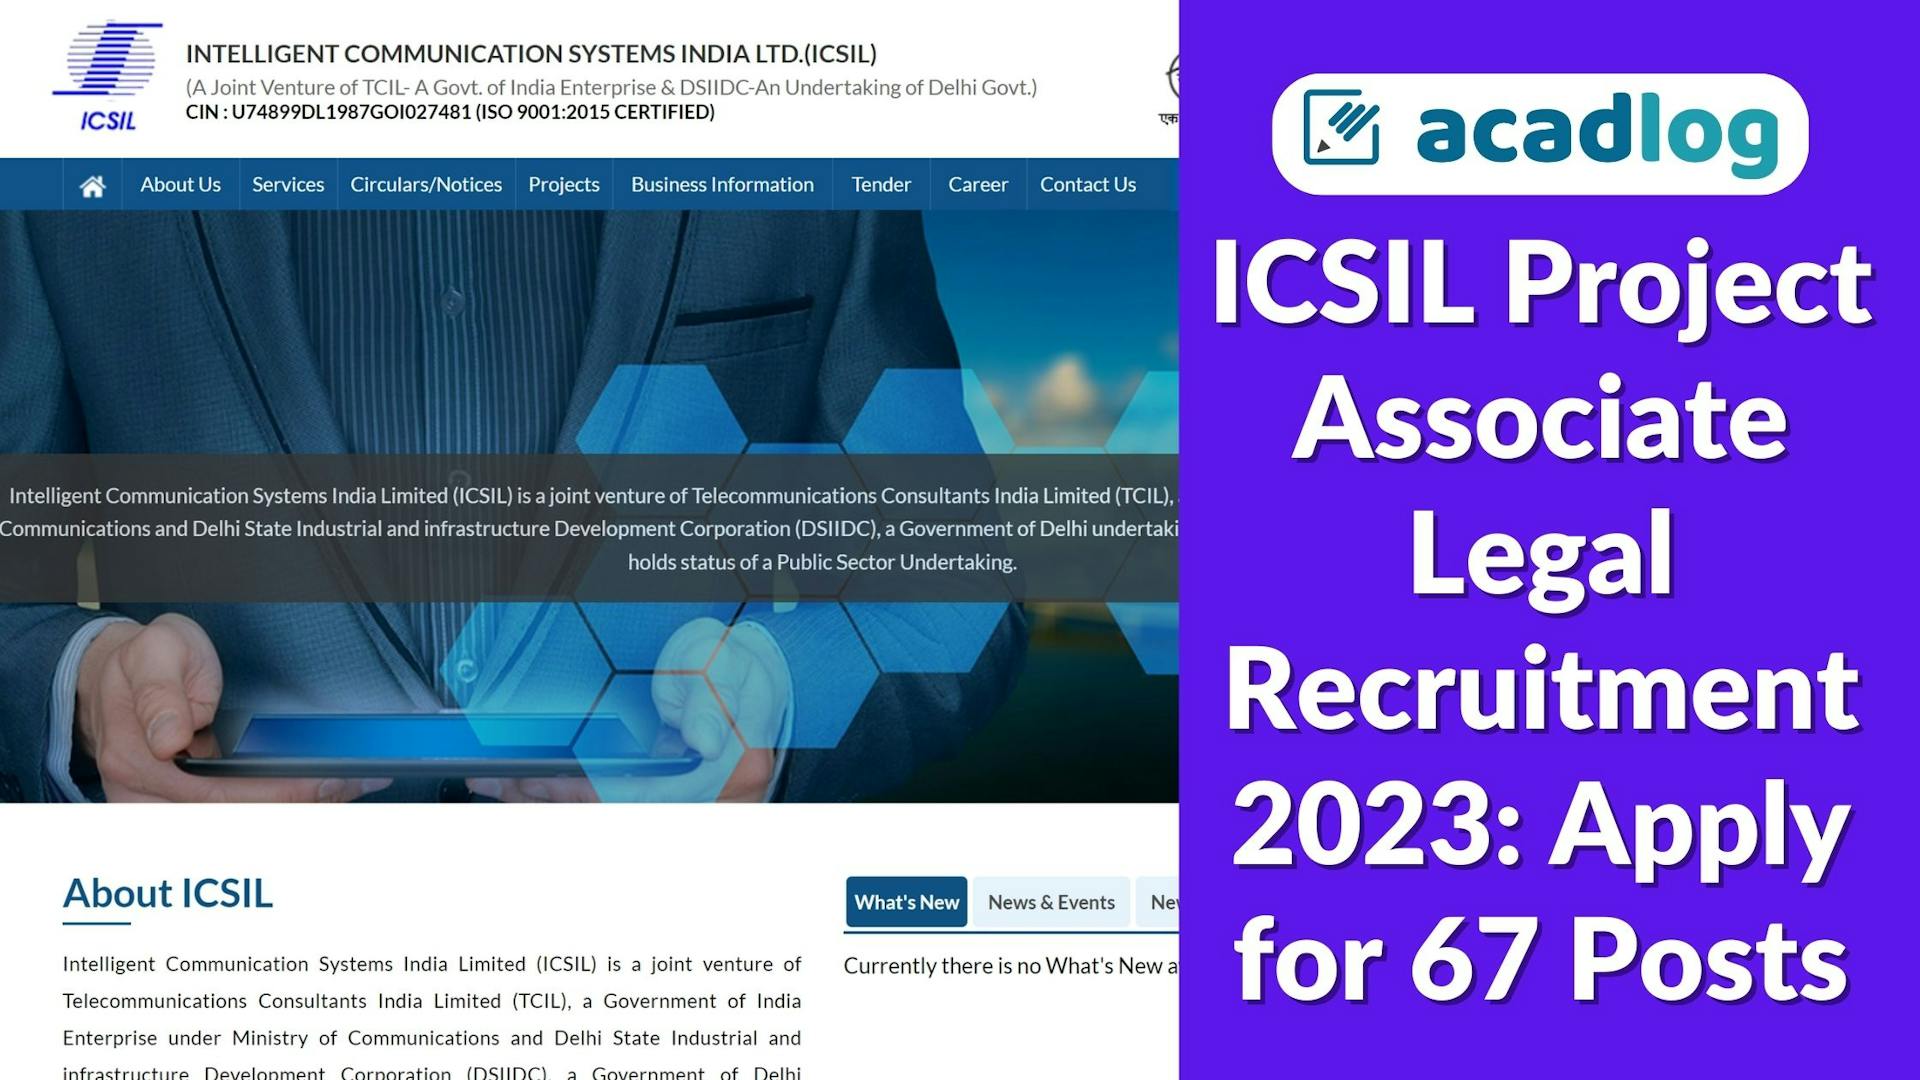 ICSIL Project Associate Legal Recruitment 2023: Apply for 67 Posts